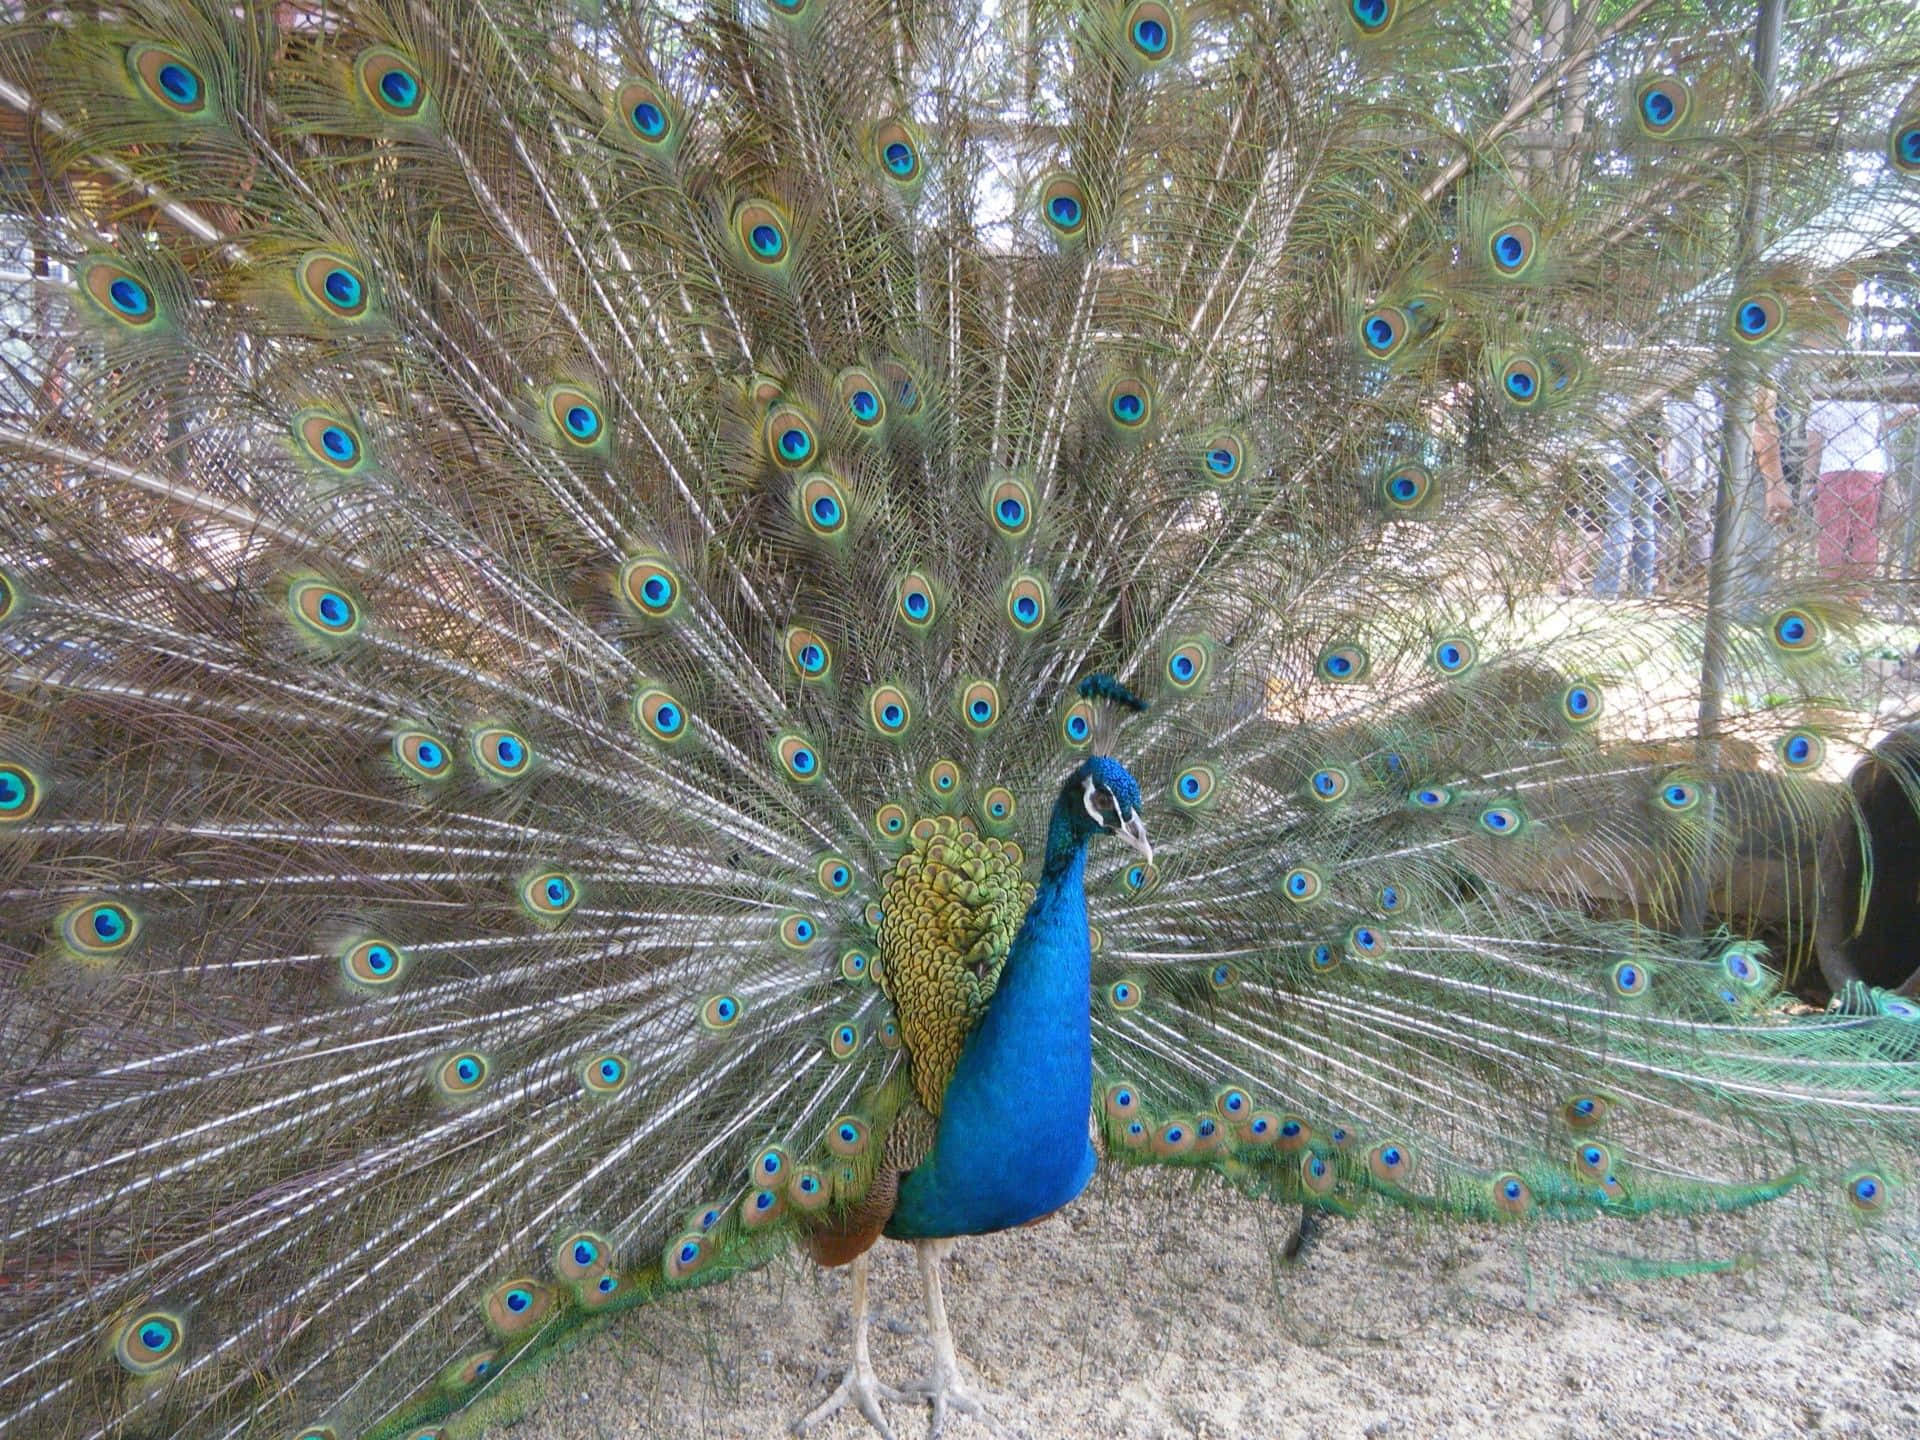 The beauty of nature, seen in the beauty of the peacock.